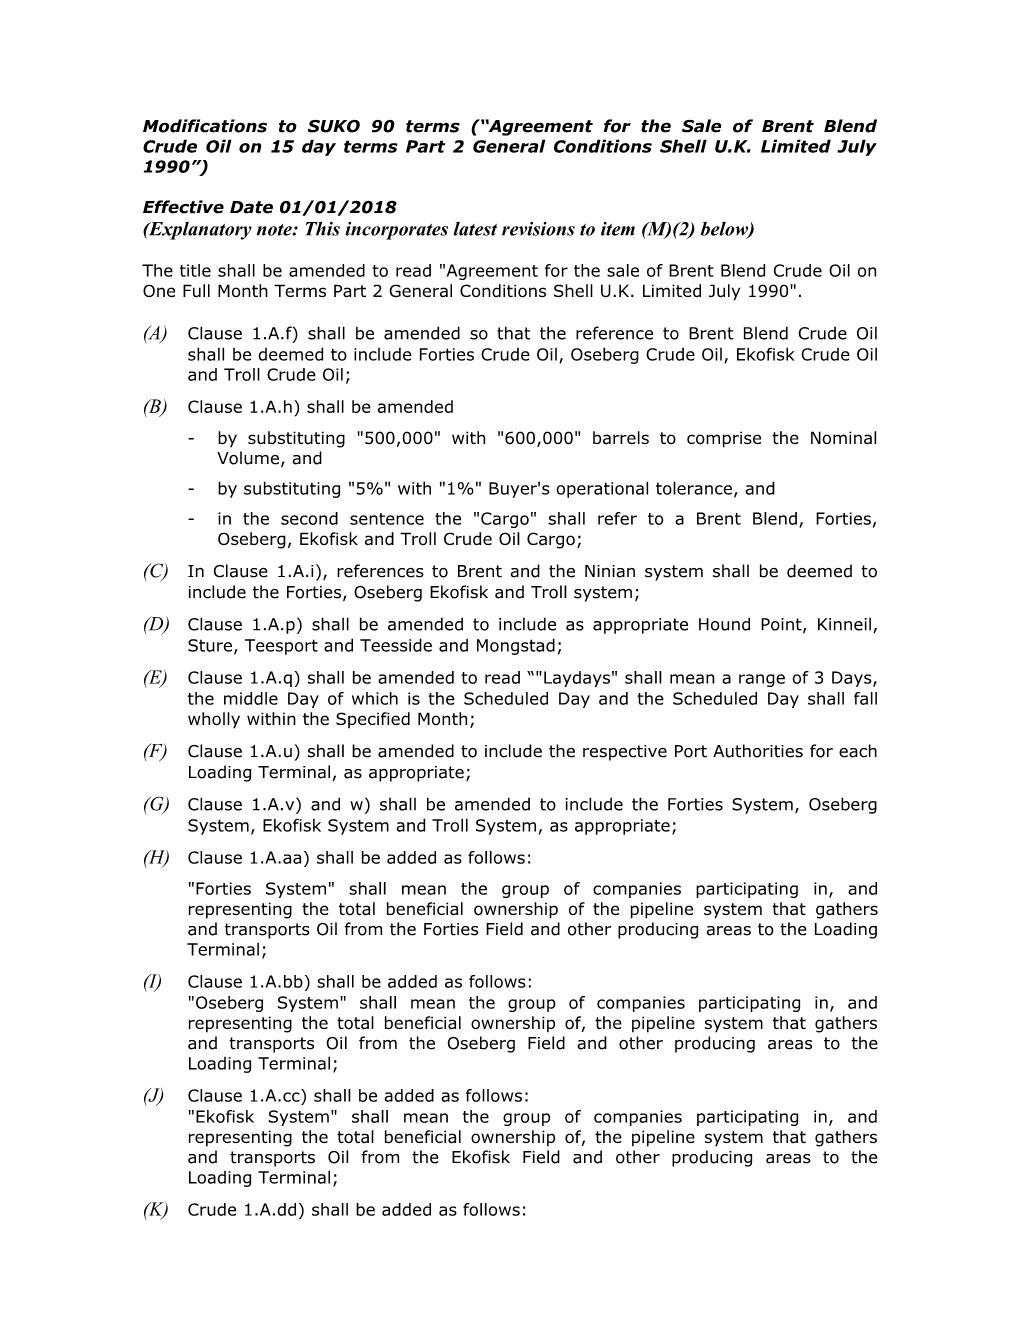 Modifications to SUKO 90 Terms ( Agreement for the Sale of Brent Blend Crude Oil on 21